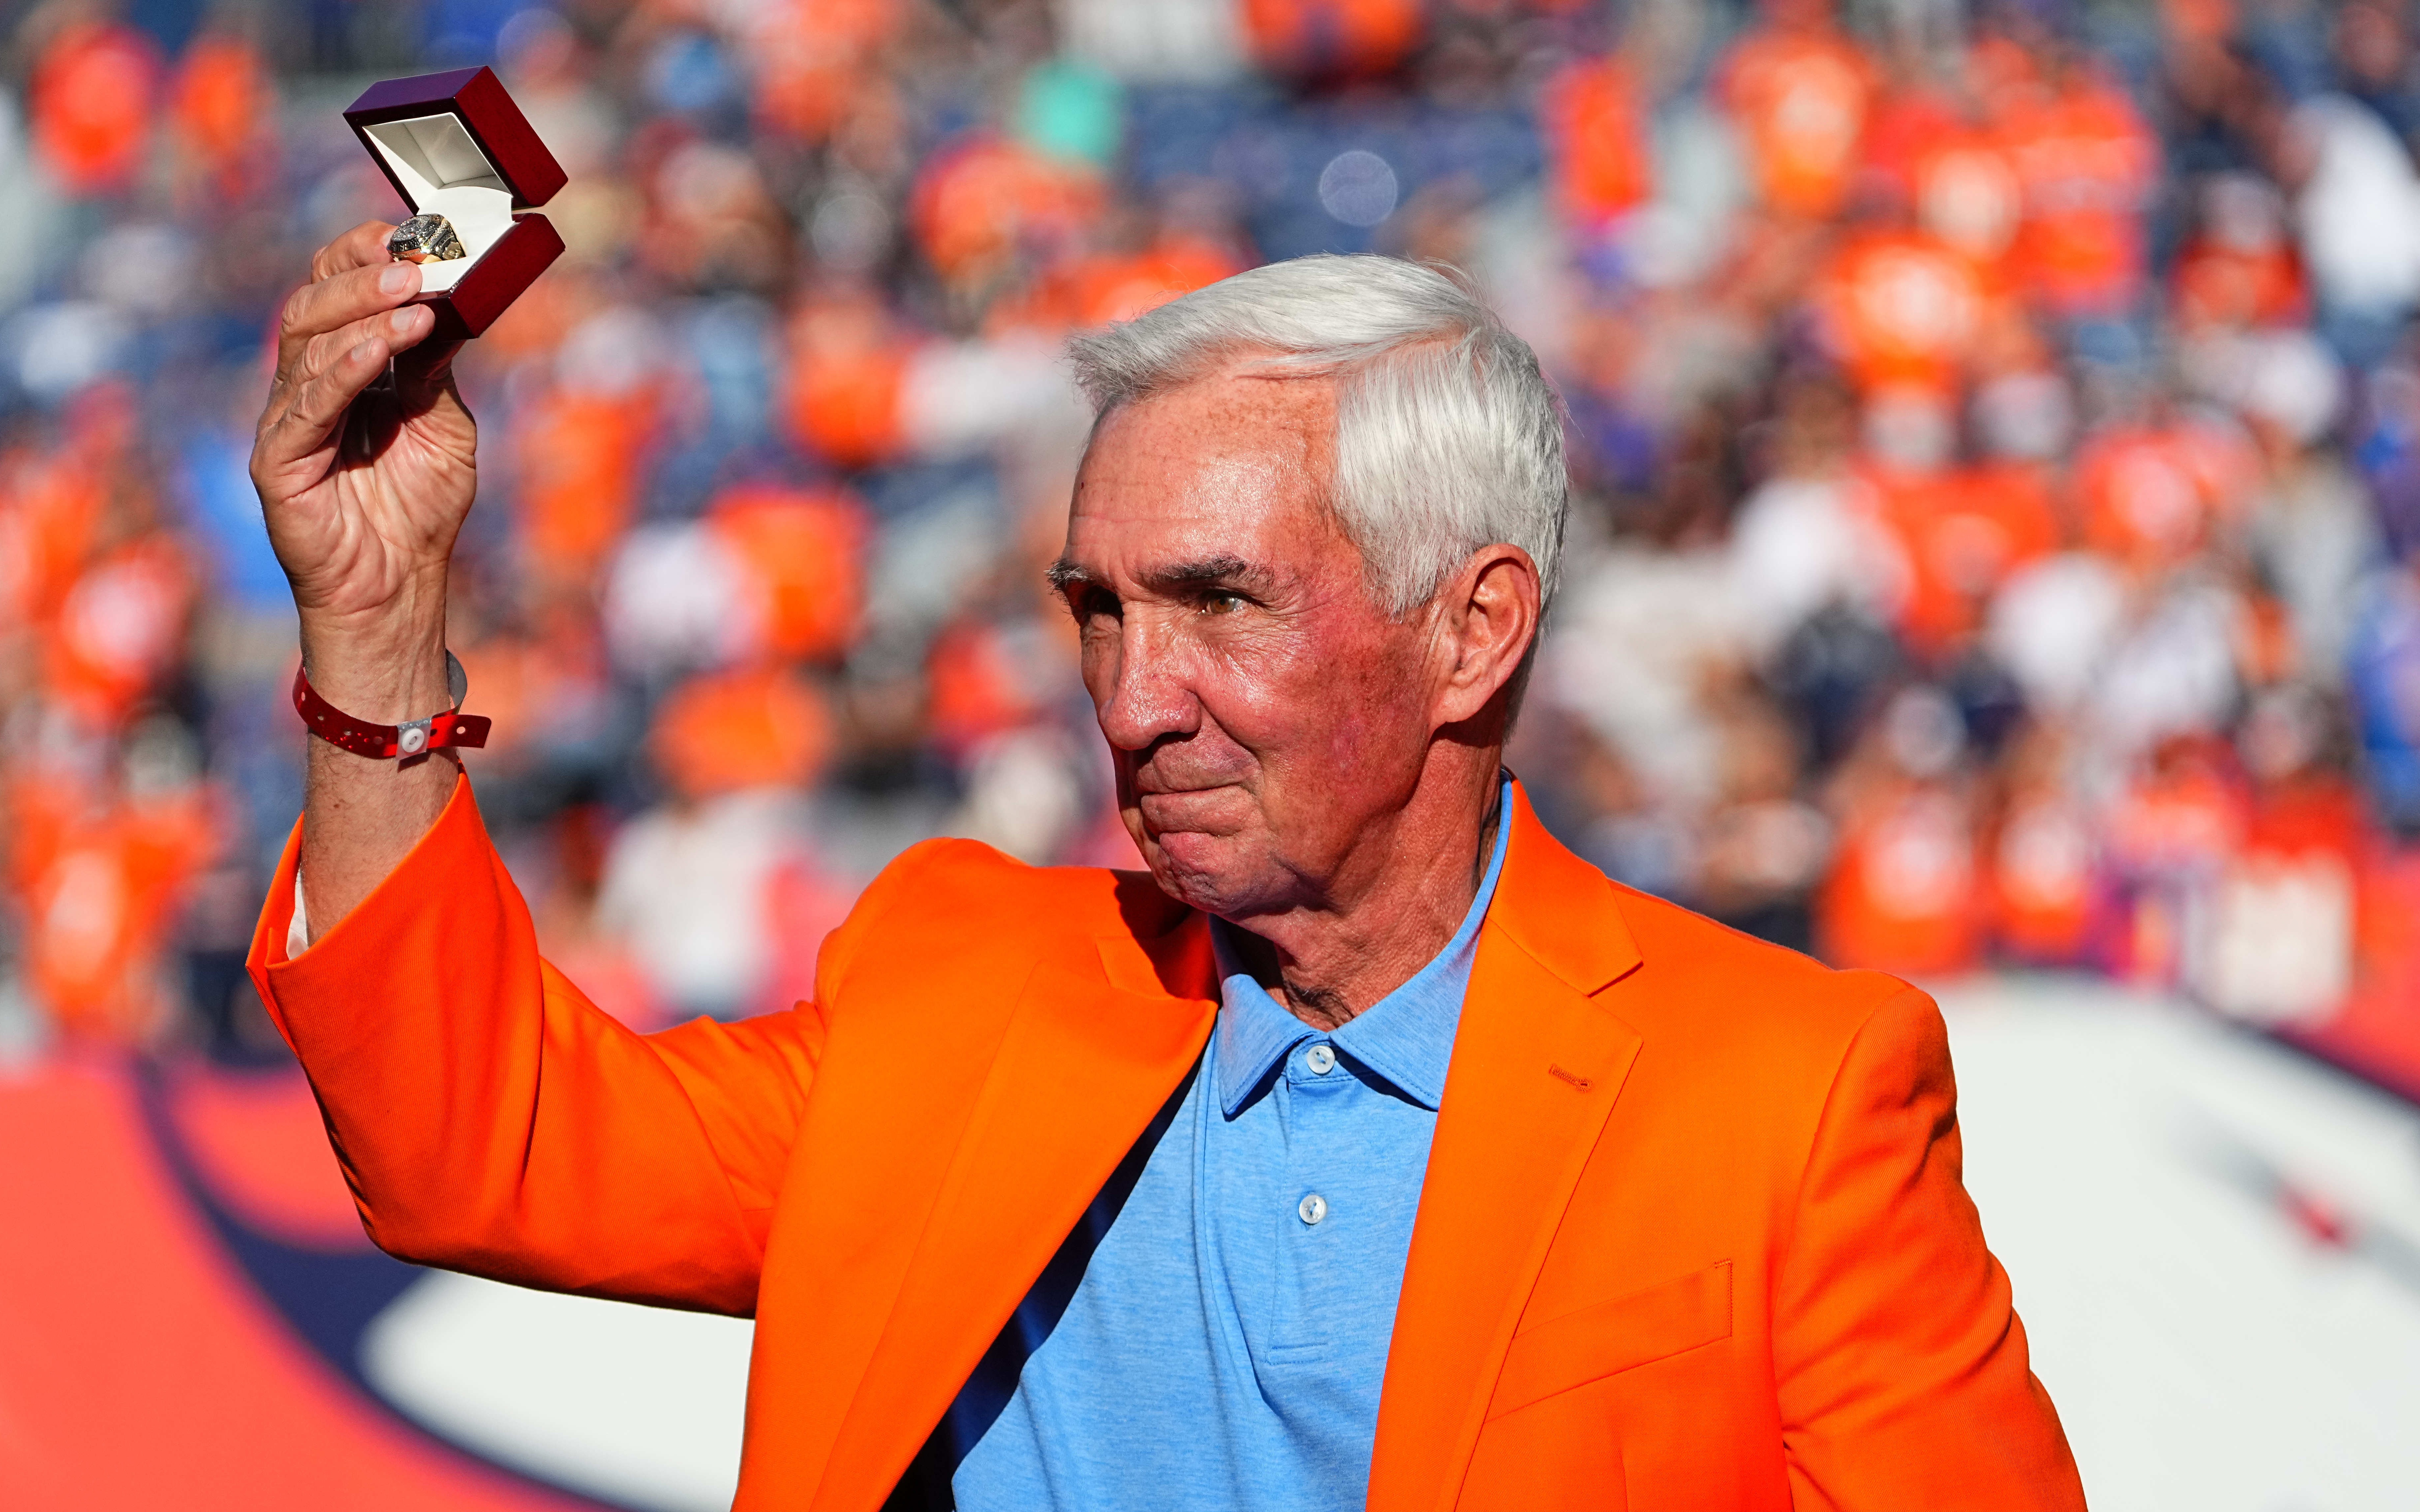 Mike Shanahan at his Ring of Fame induction in 2021. Credit: Ron Chenoy, USA TODAY Sports.